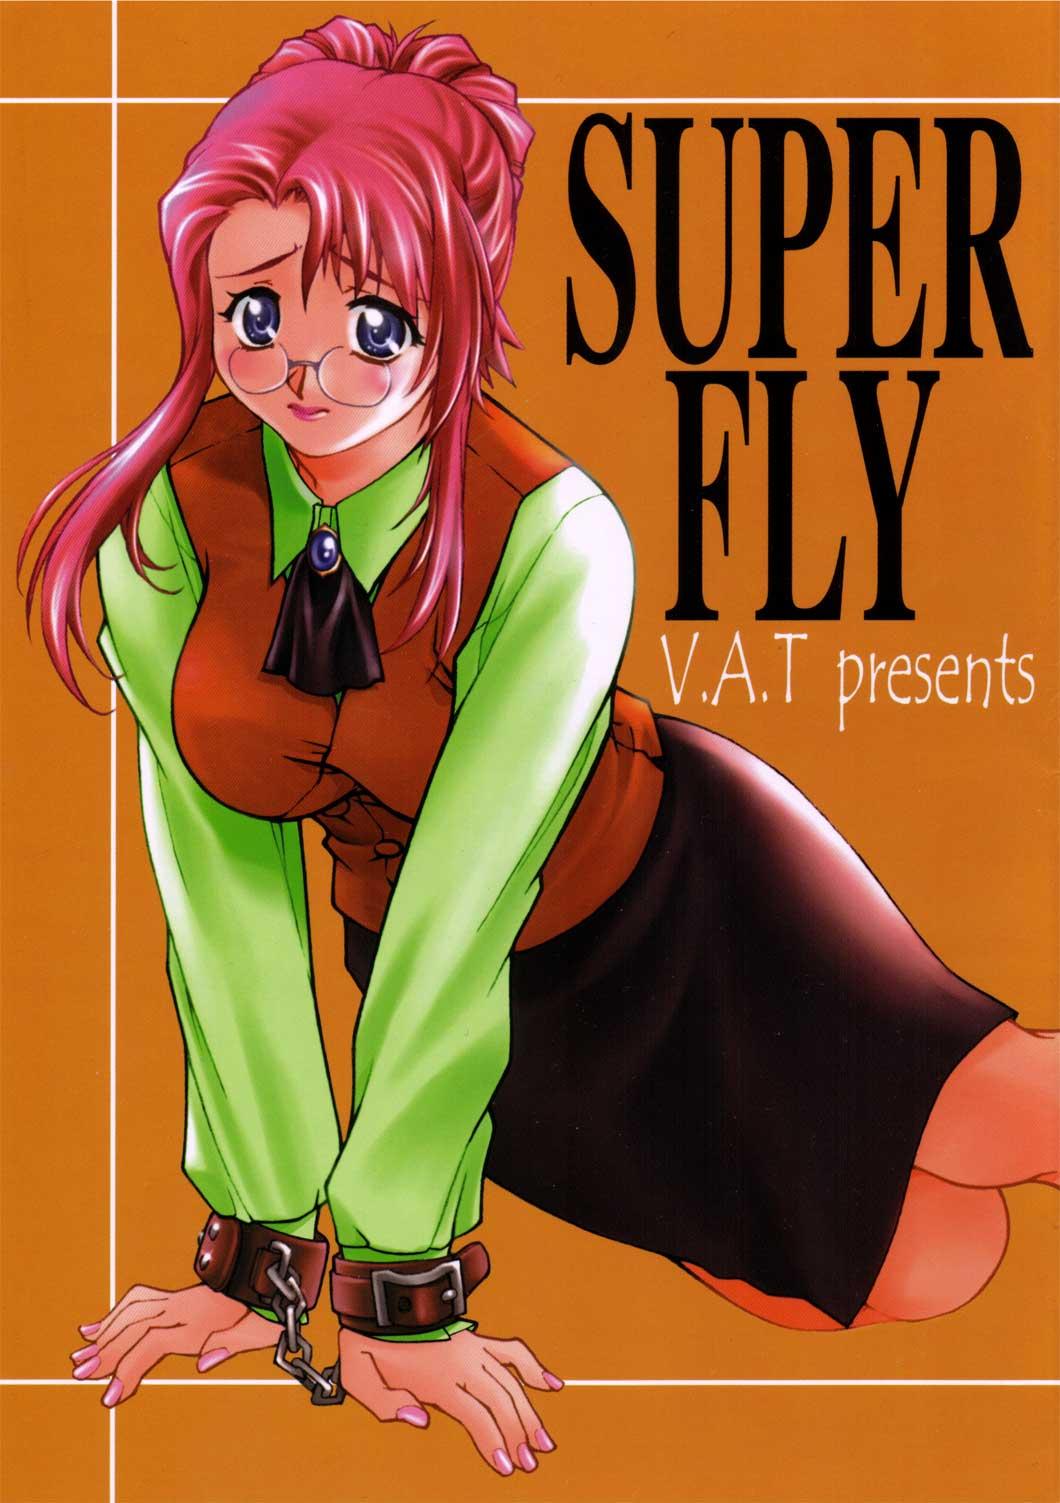 SUPER FLY 0